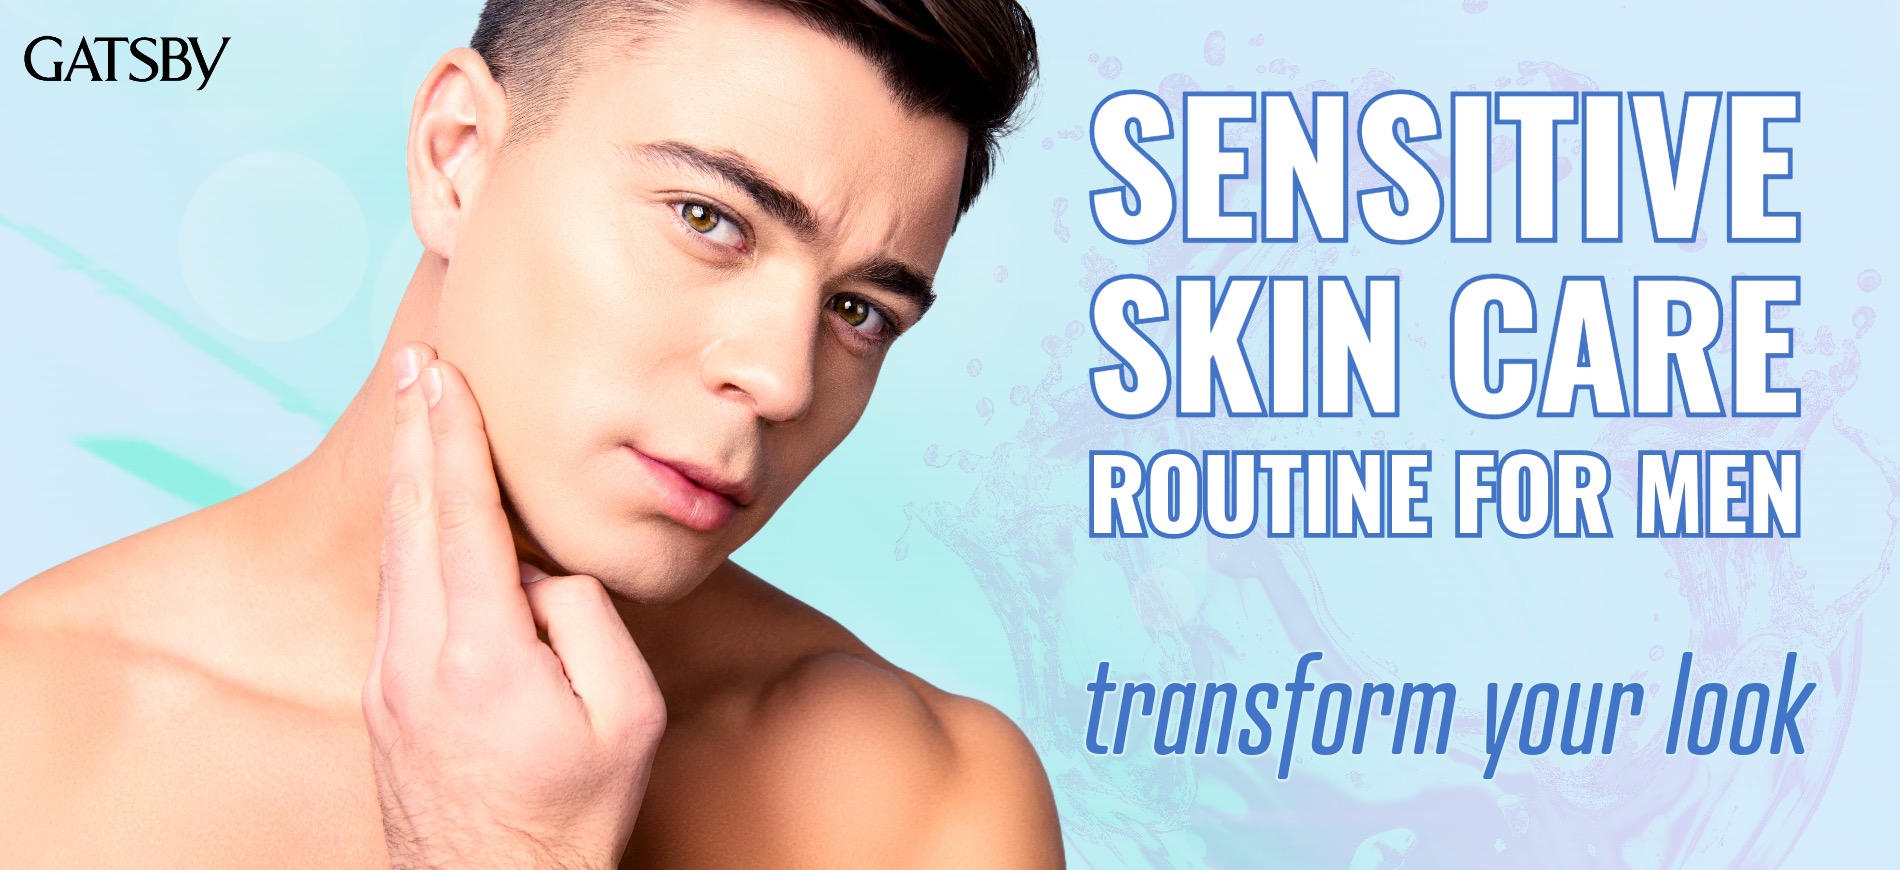 A Sensitive Skin Care Routine for Men: Transform Your Look